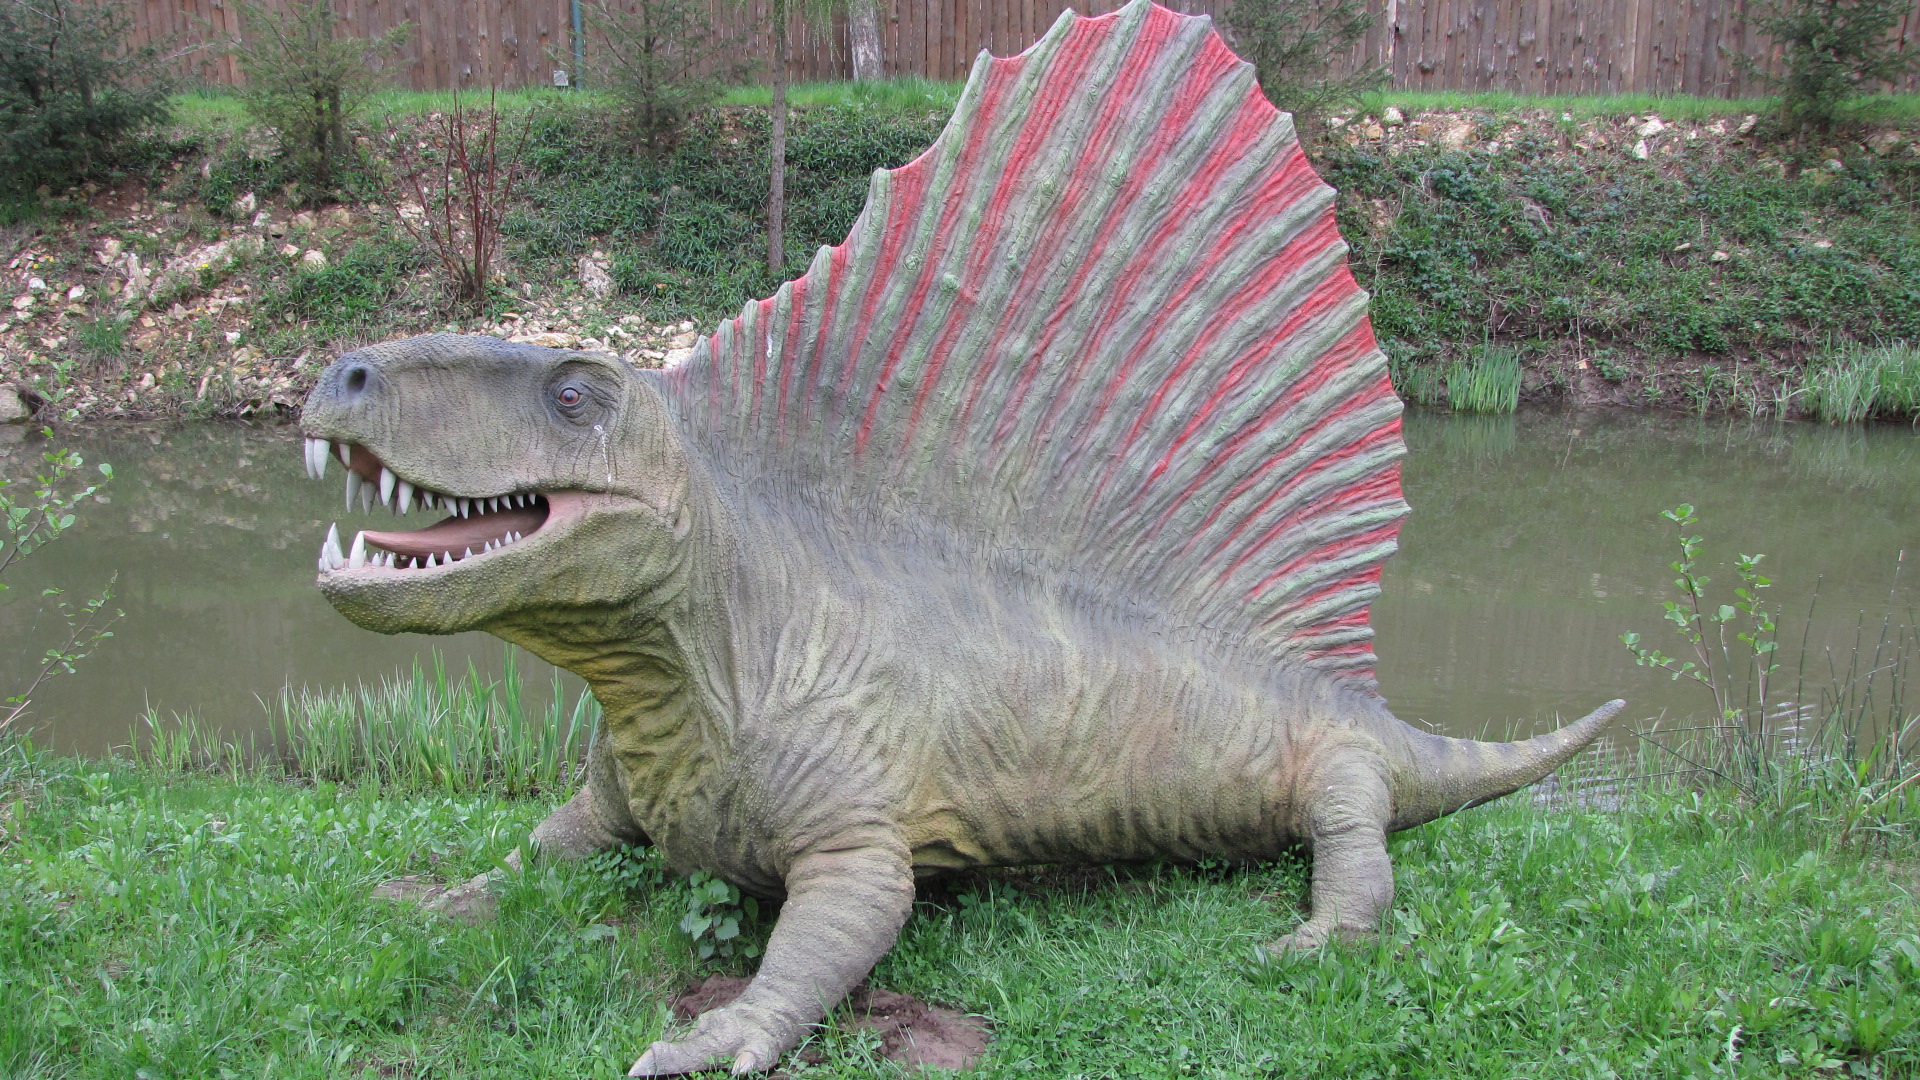 an adult dinosaur with its mouth open and its tail curled back